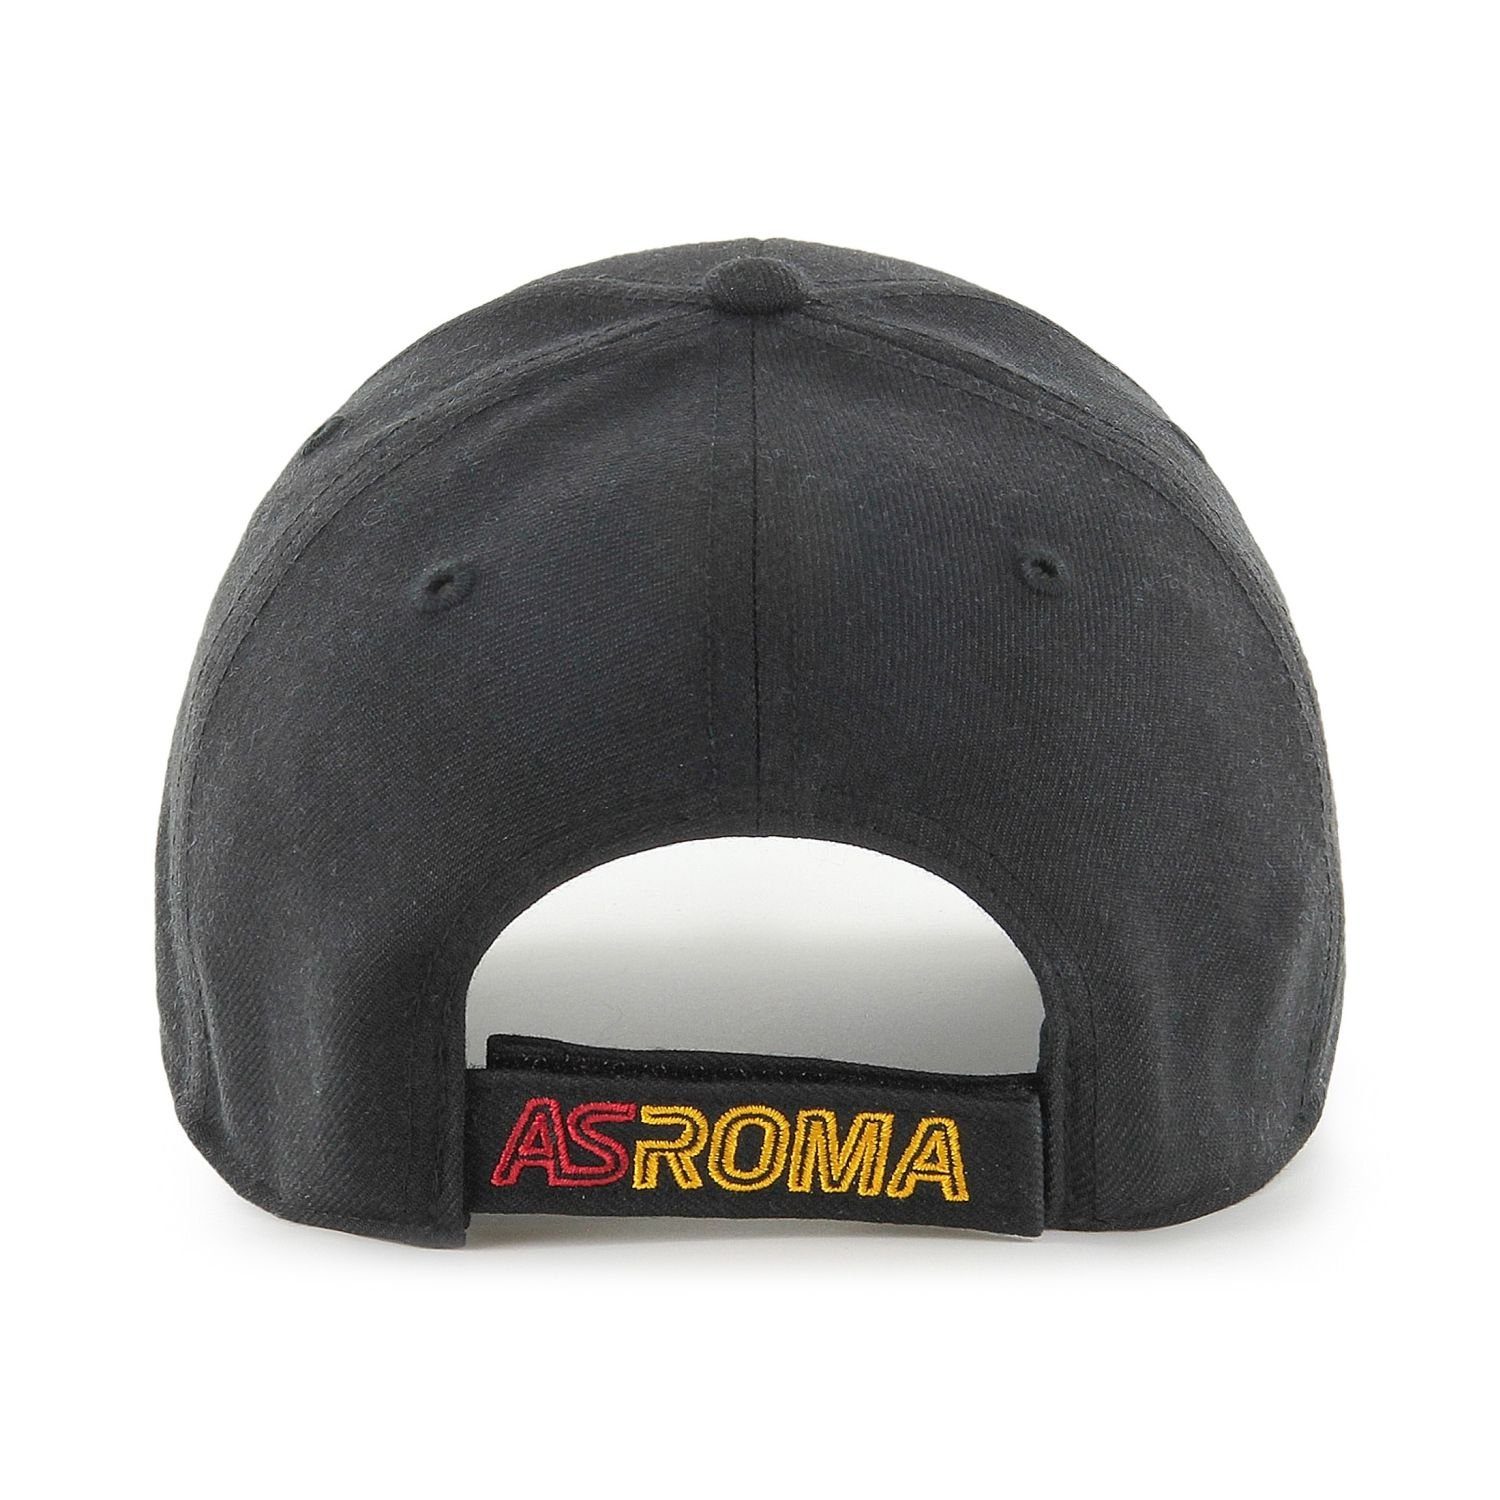 Relaxed '47 Roma Brand Baseball Cap Fit AS